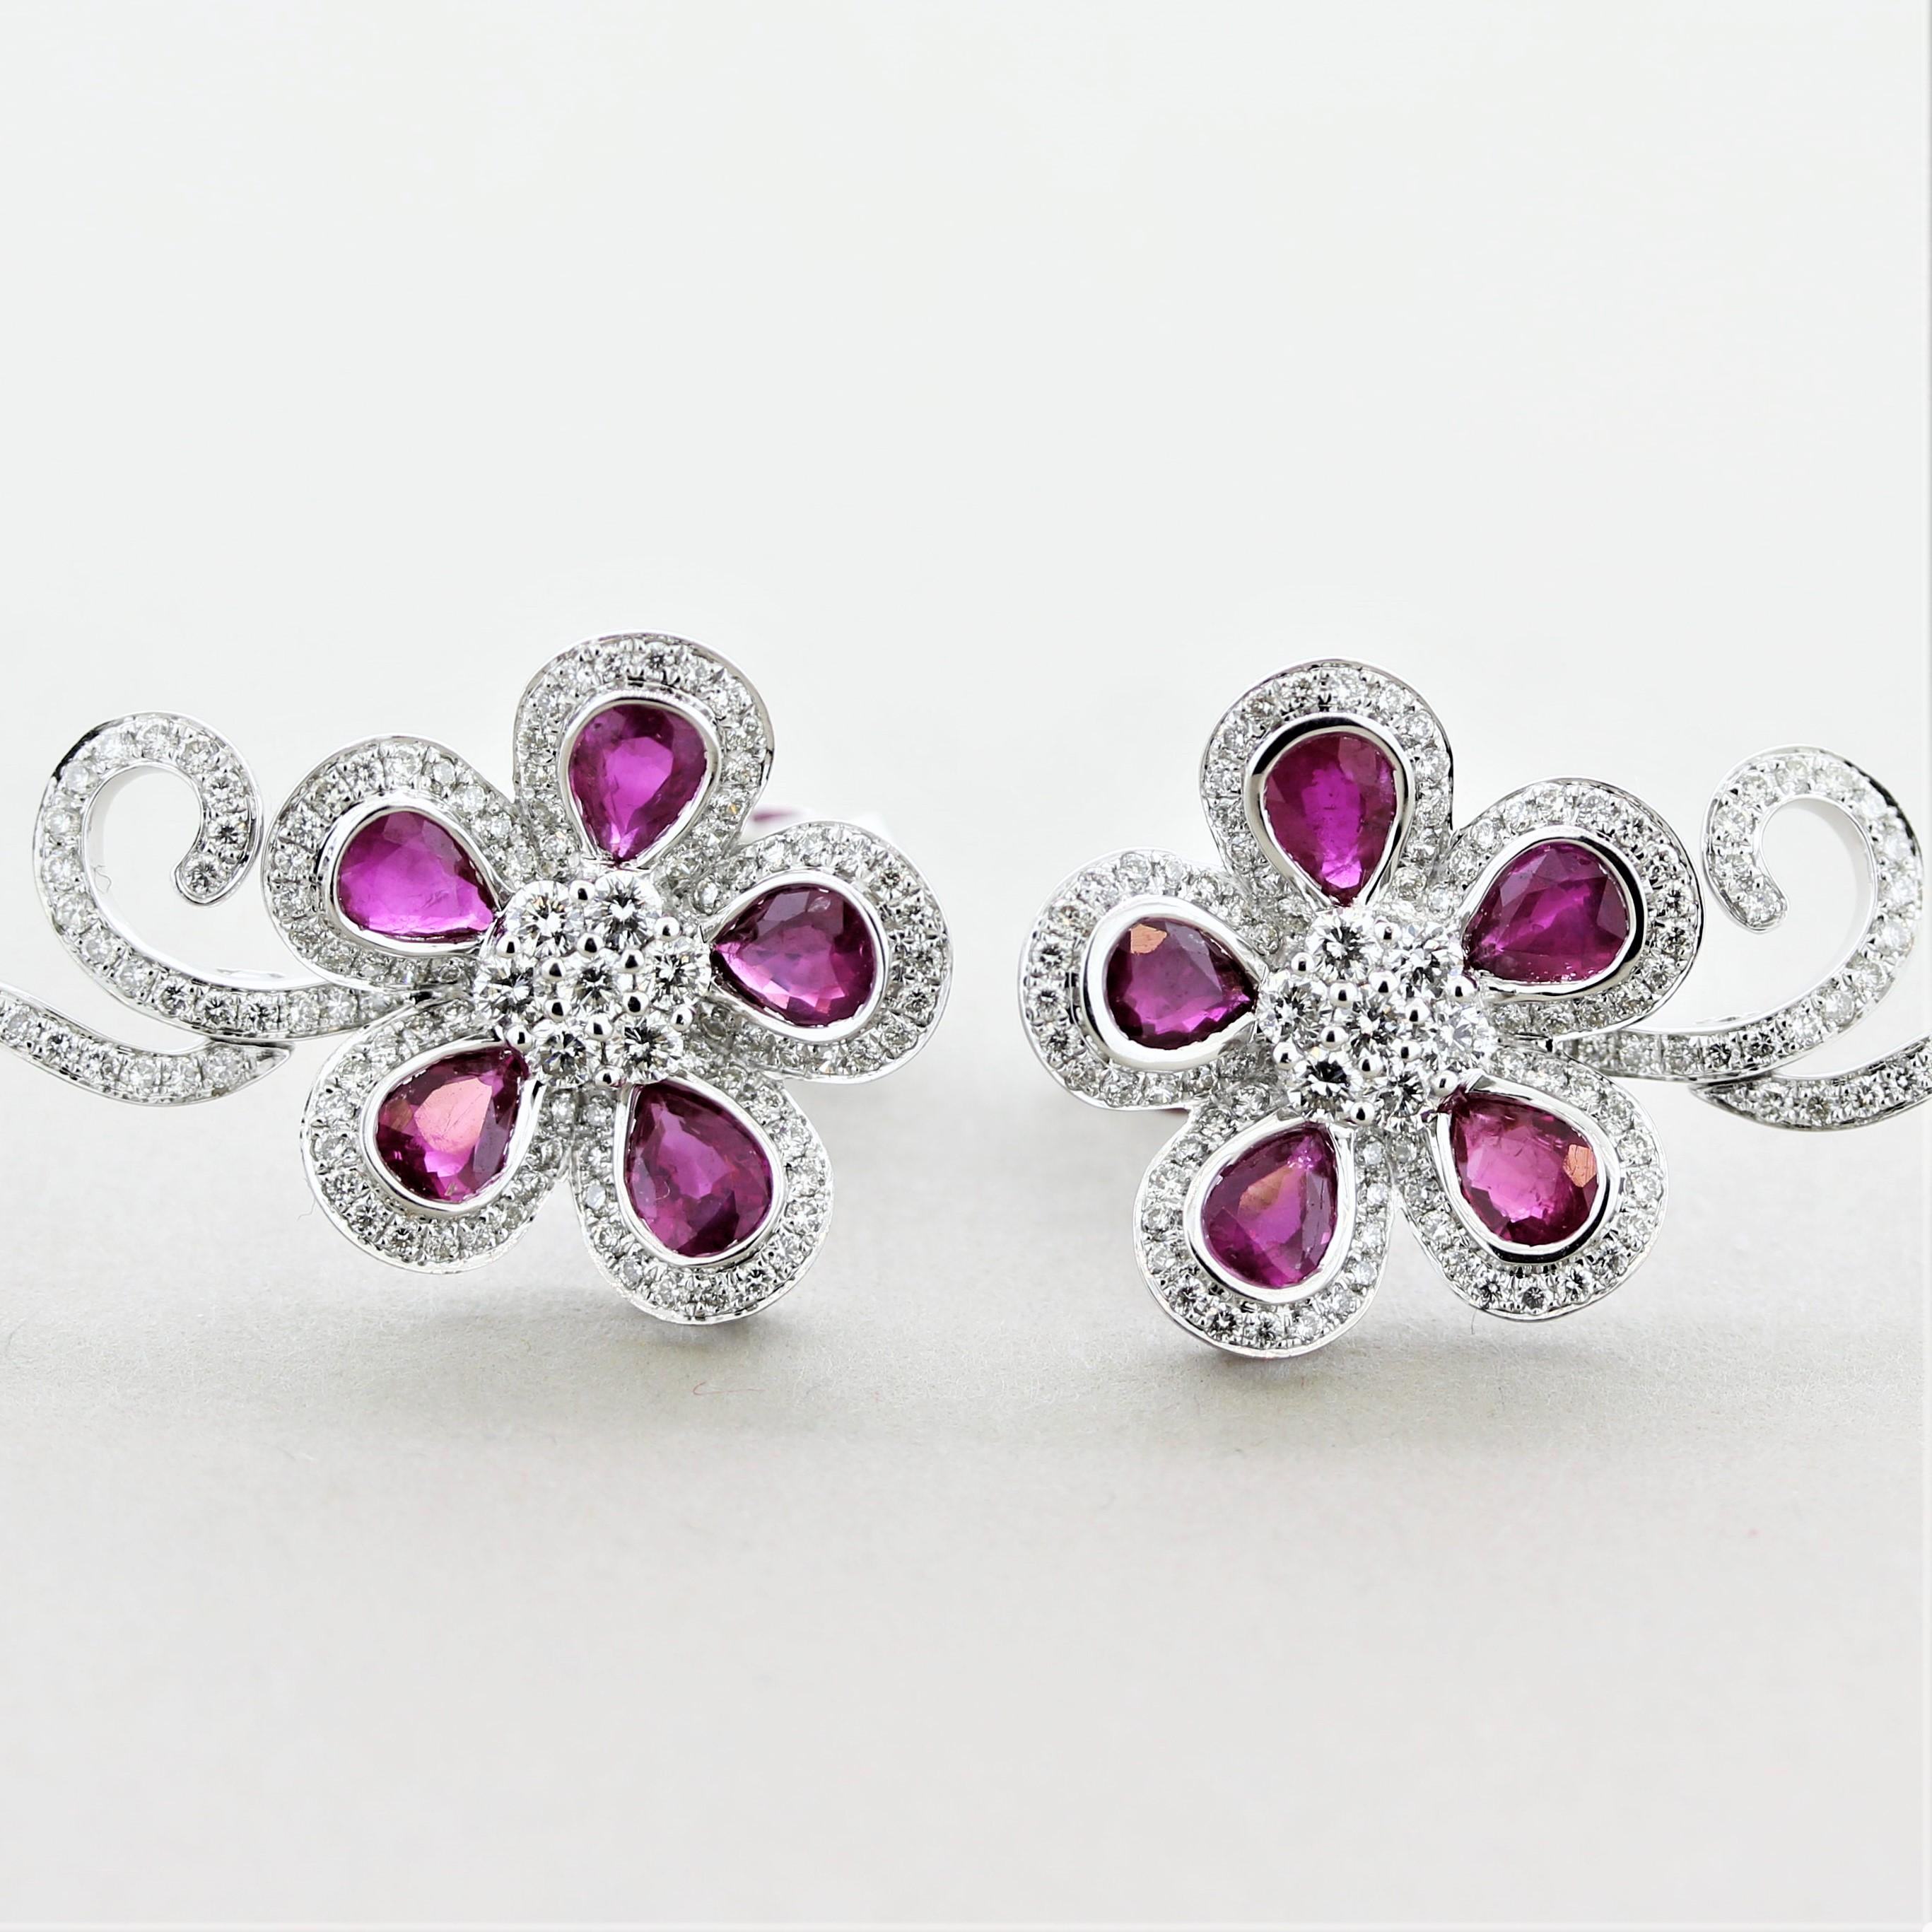 A fun and stylish pair of earrings. They feature vivid red pear-shaped rubies weighing a total of 3.42 carats along with 1.53 carats of round brilliant-cut diamonds. The stones are set over 18k white gold in a floral design.

Length: 1.25 inches